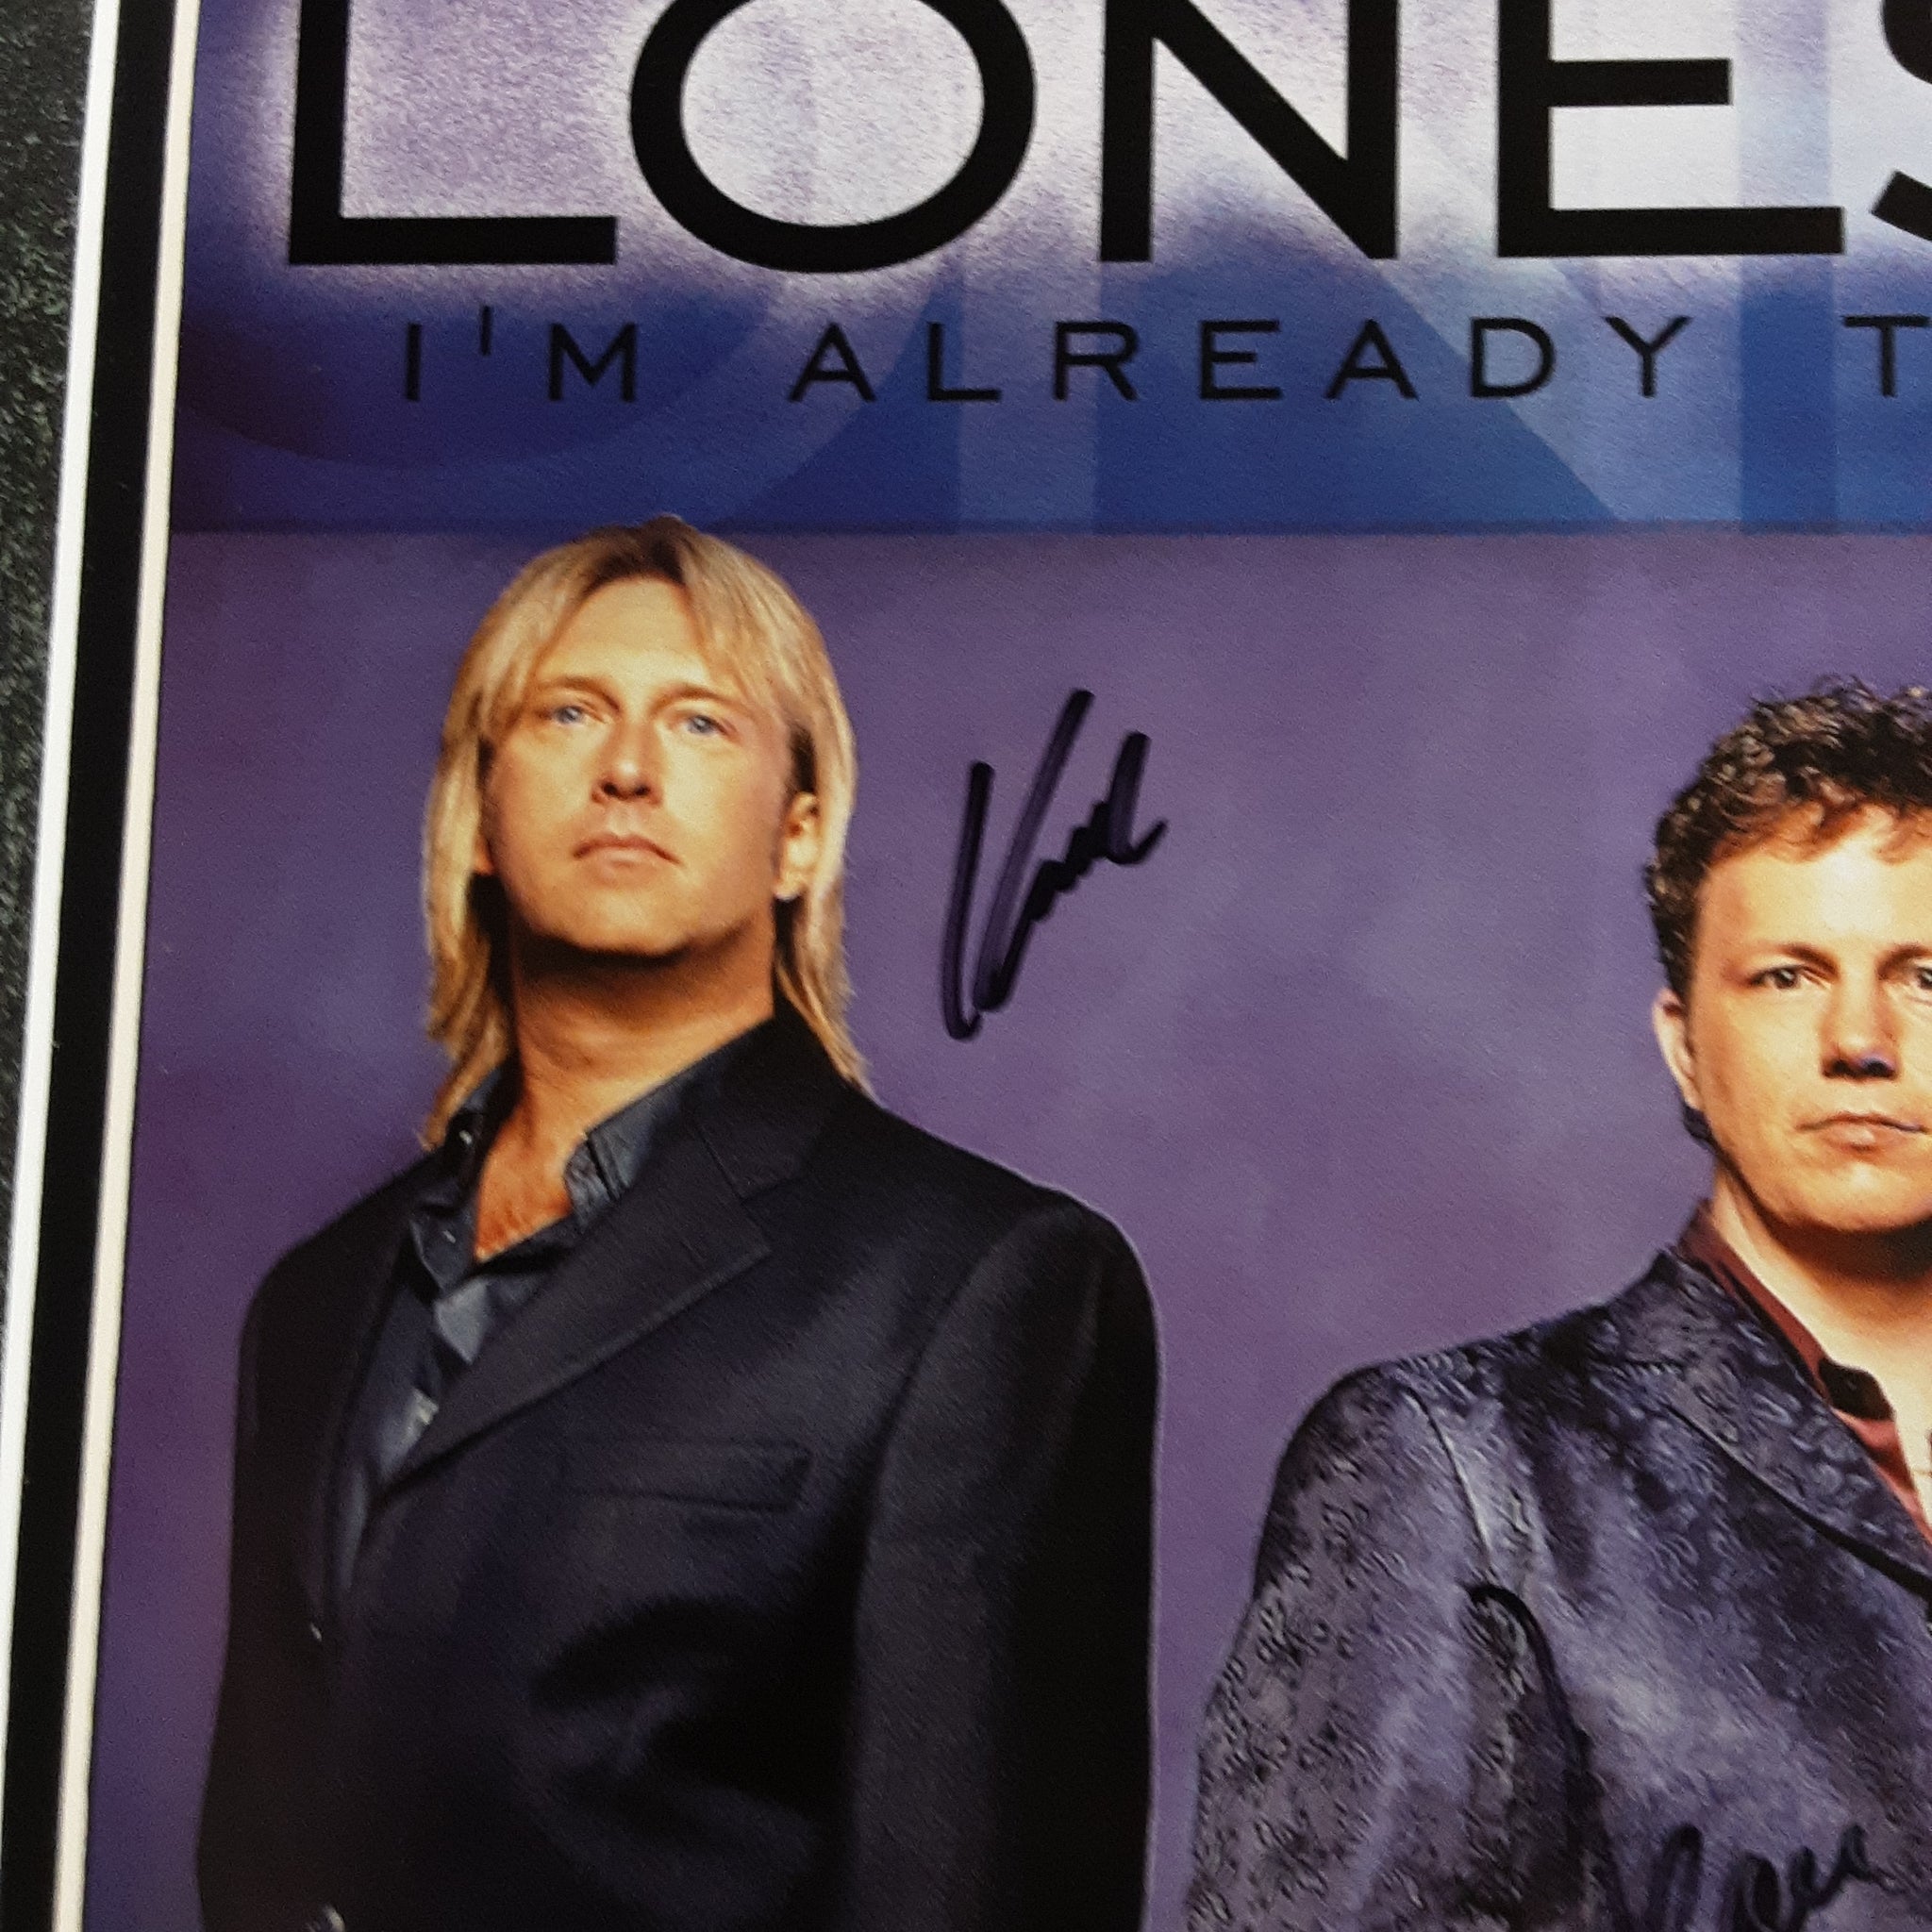 Blake Shelton, Jamie O'Neal, and Lonestar Authentic Signed Poster Framed 13x19 Autographed JSA